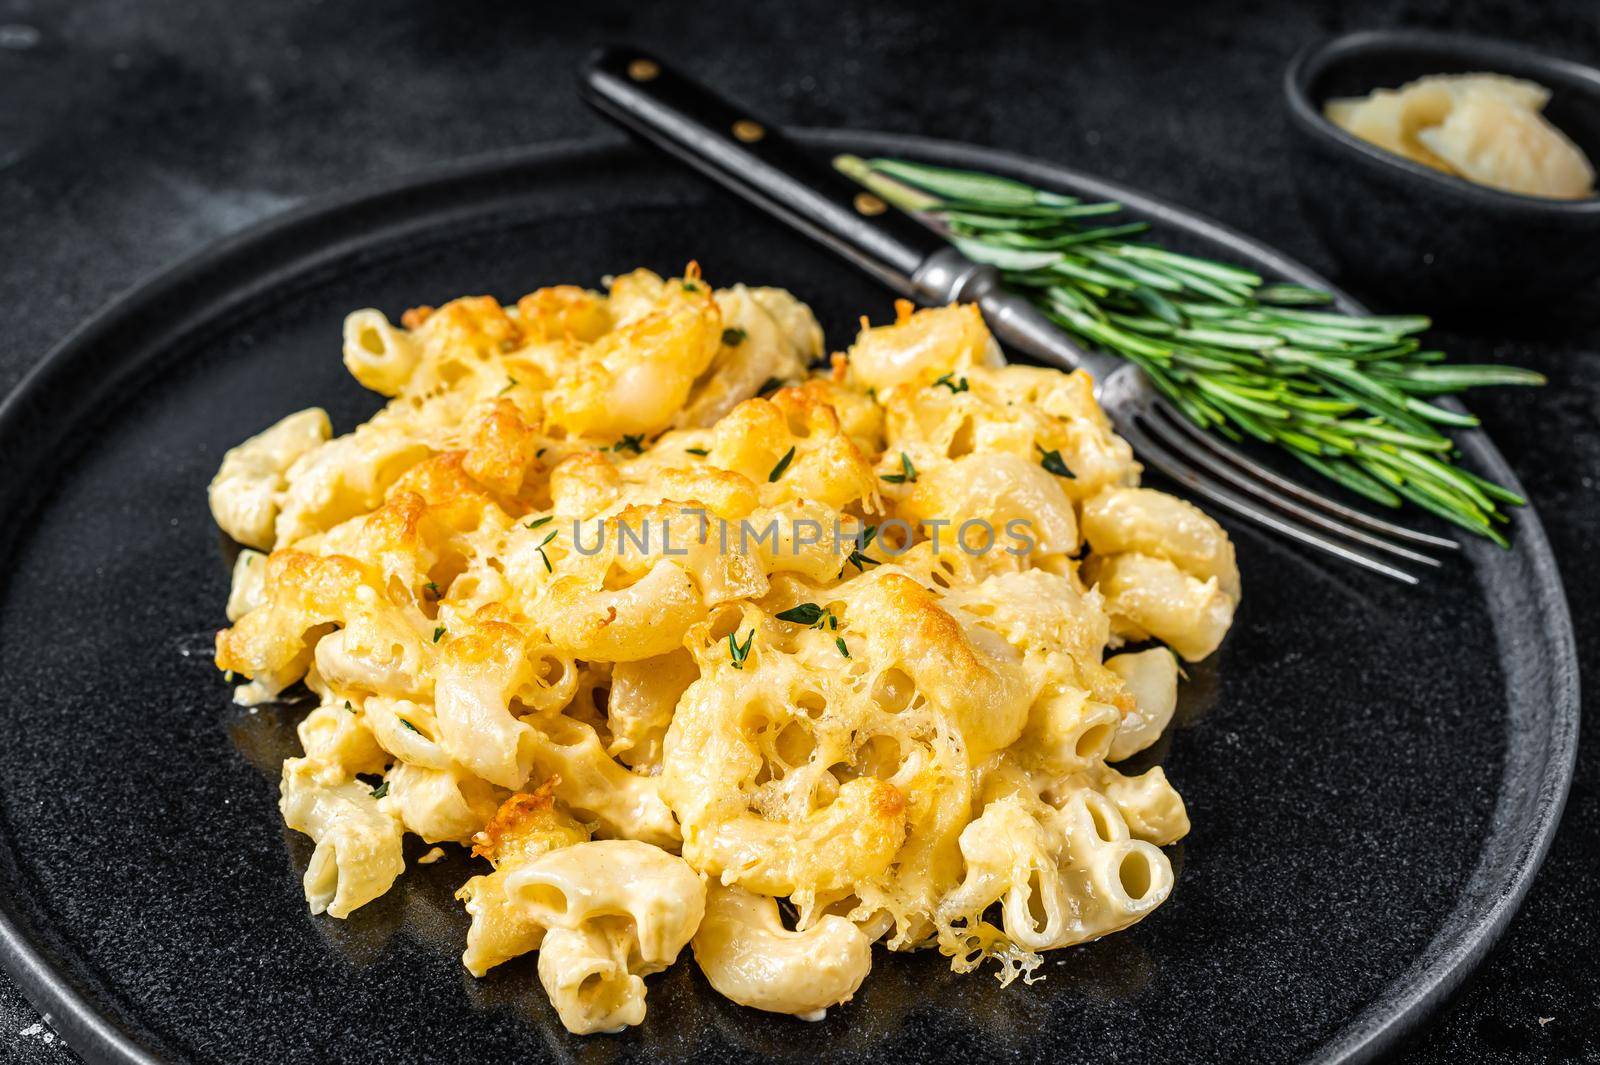 Baked Macaroni Mac and cheese American dish with Cheddar cheese sauce. Black background. Top view.